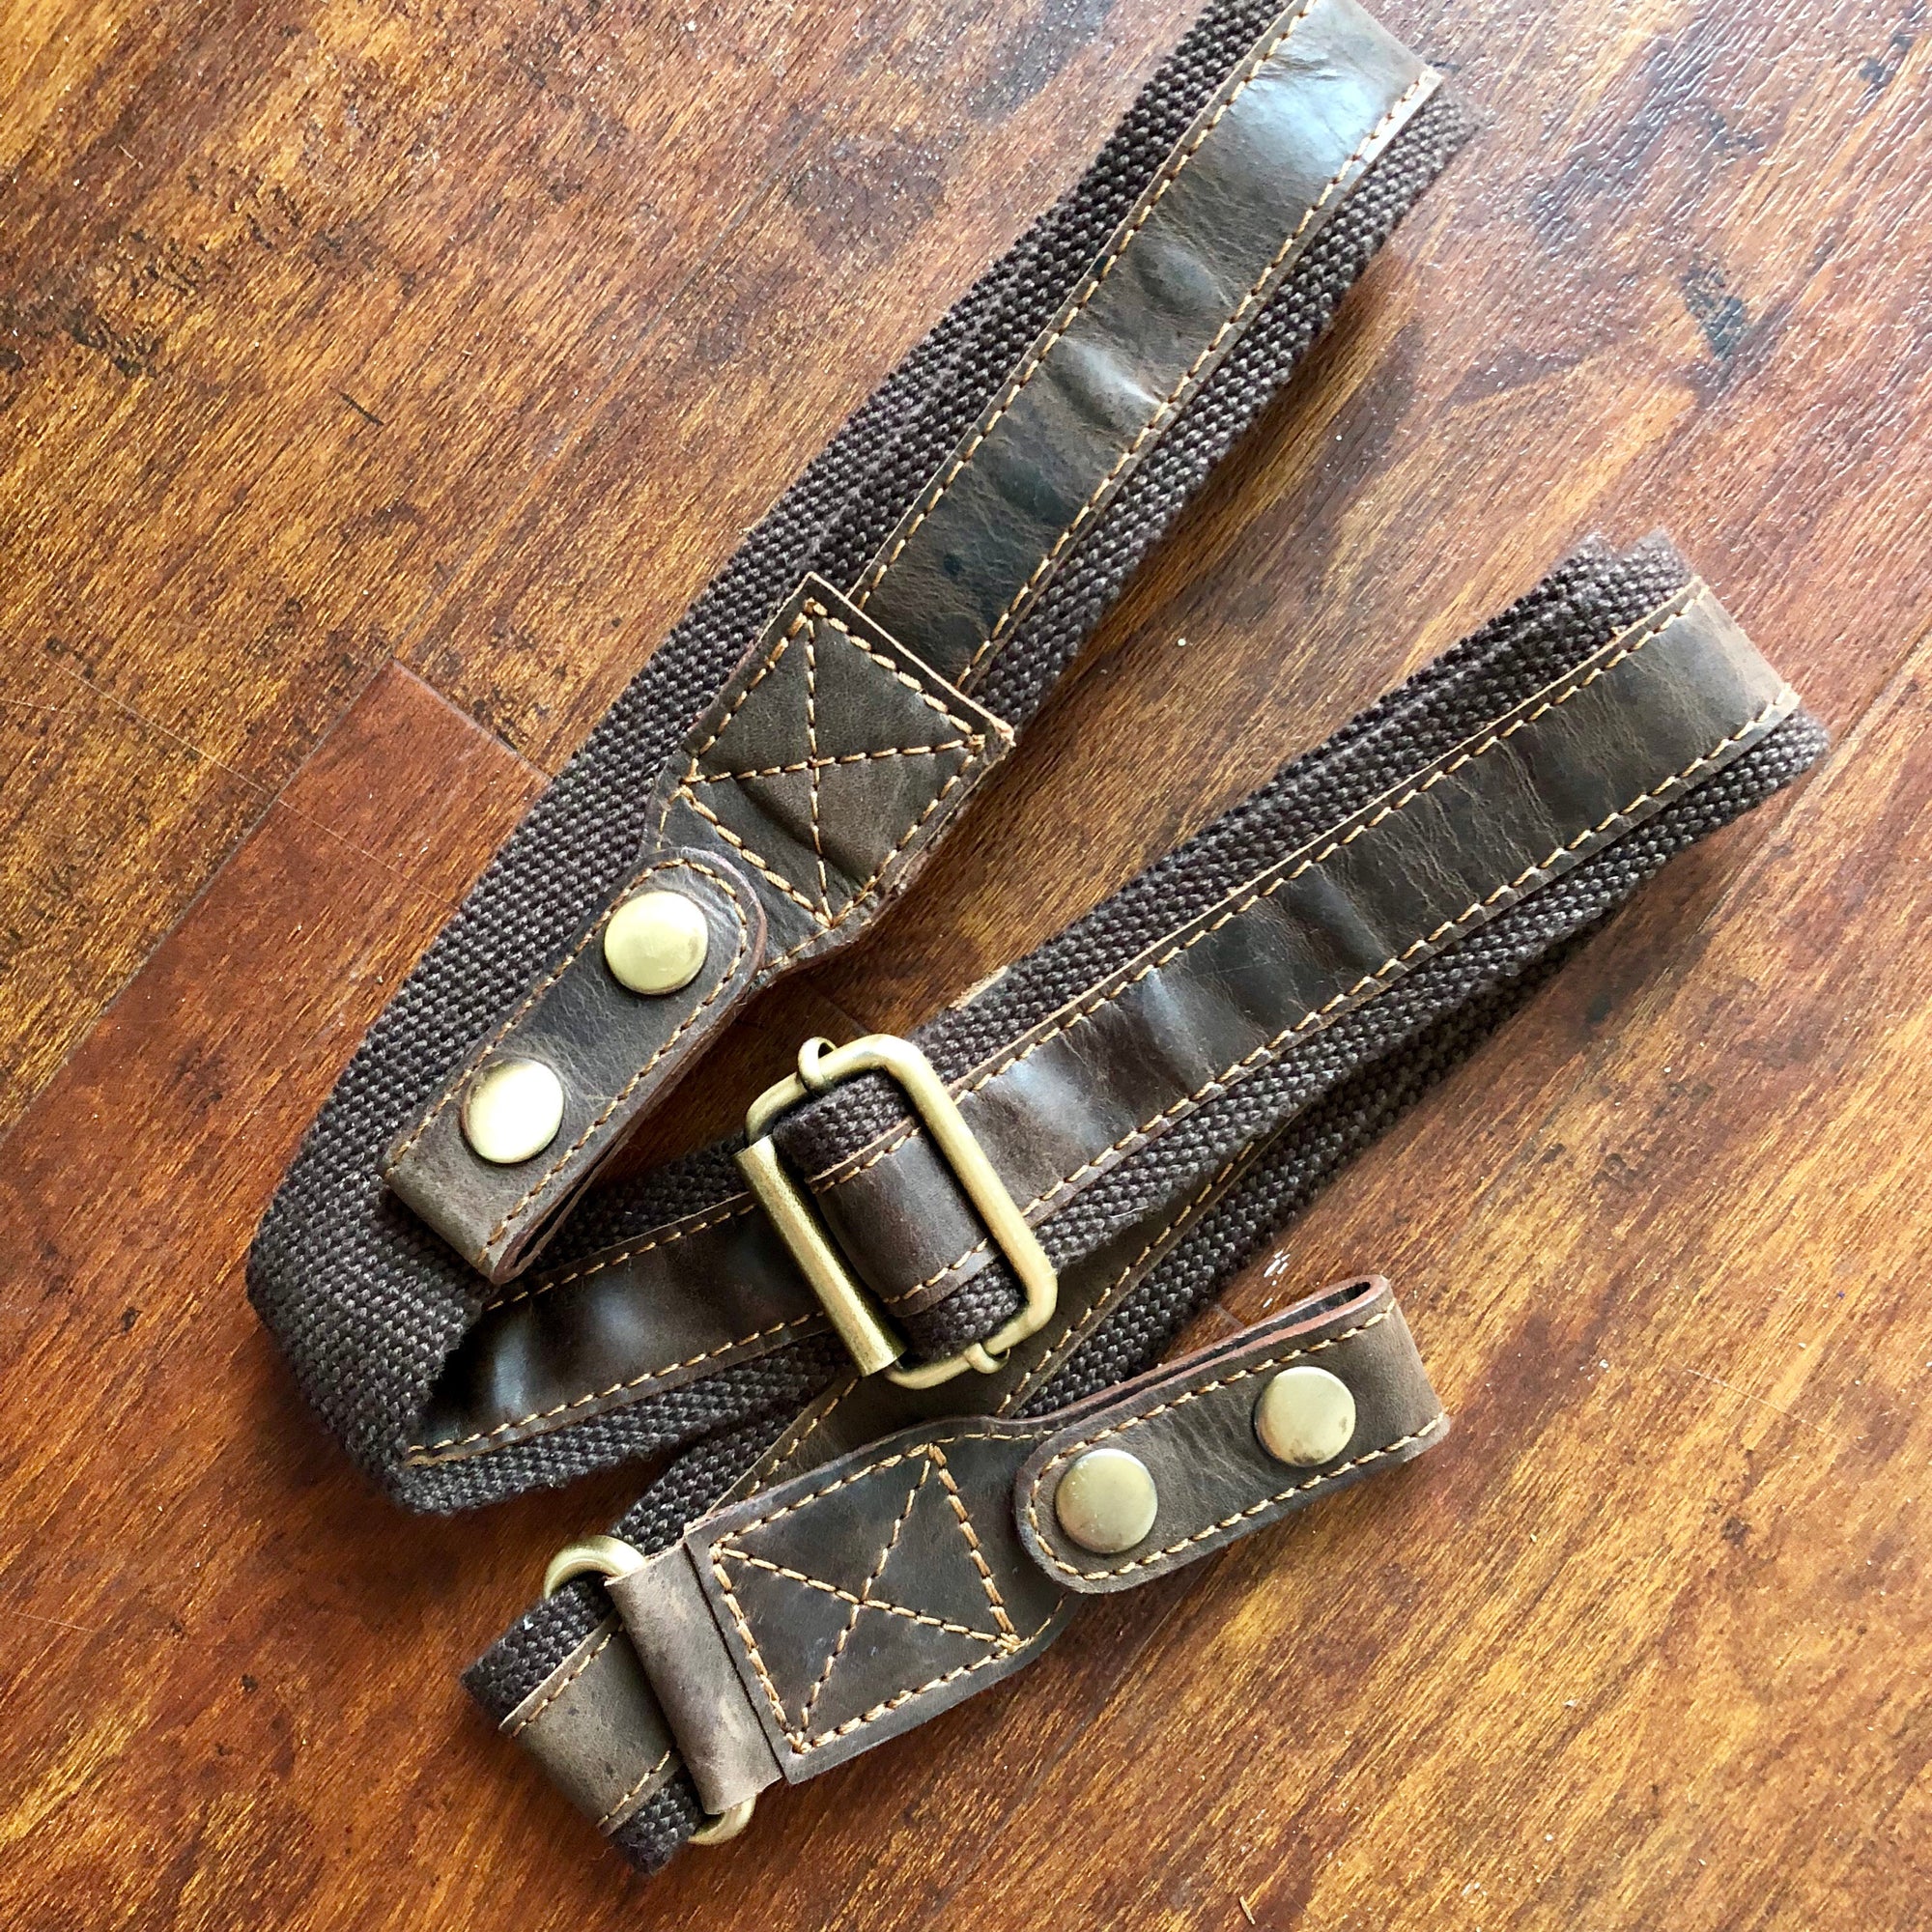 Leather Replacement Strap